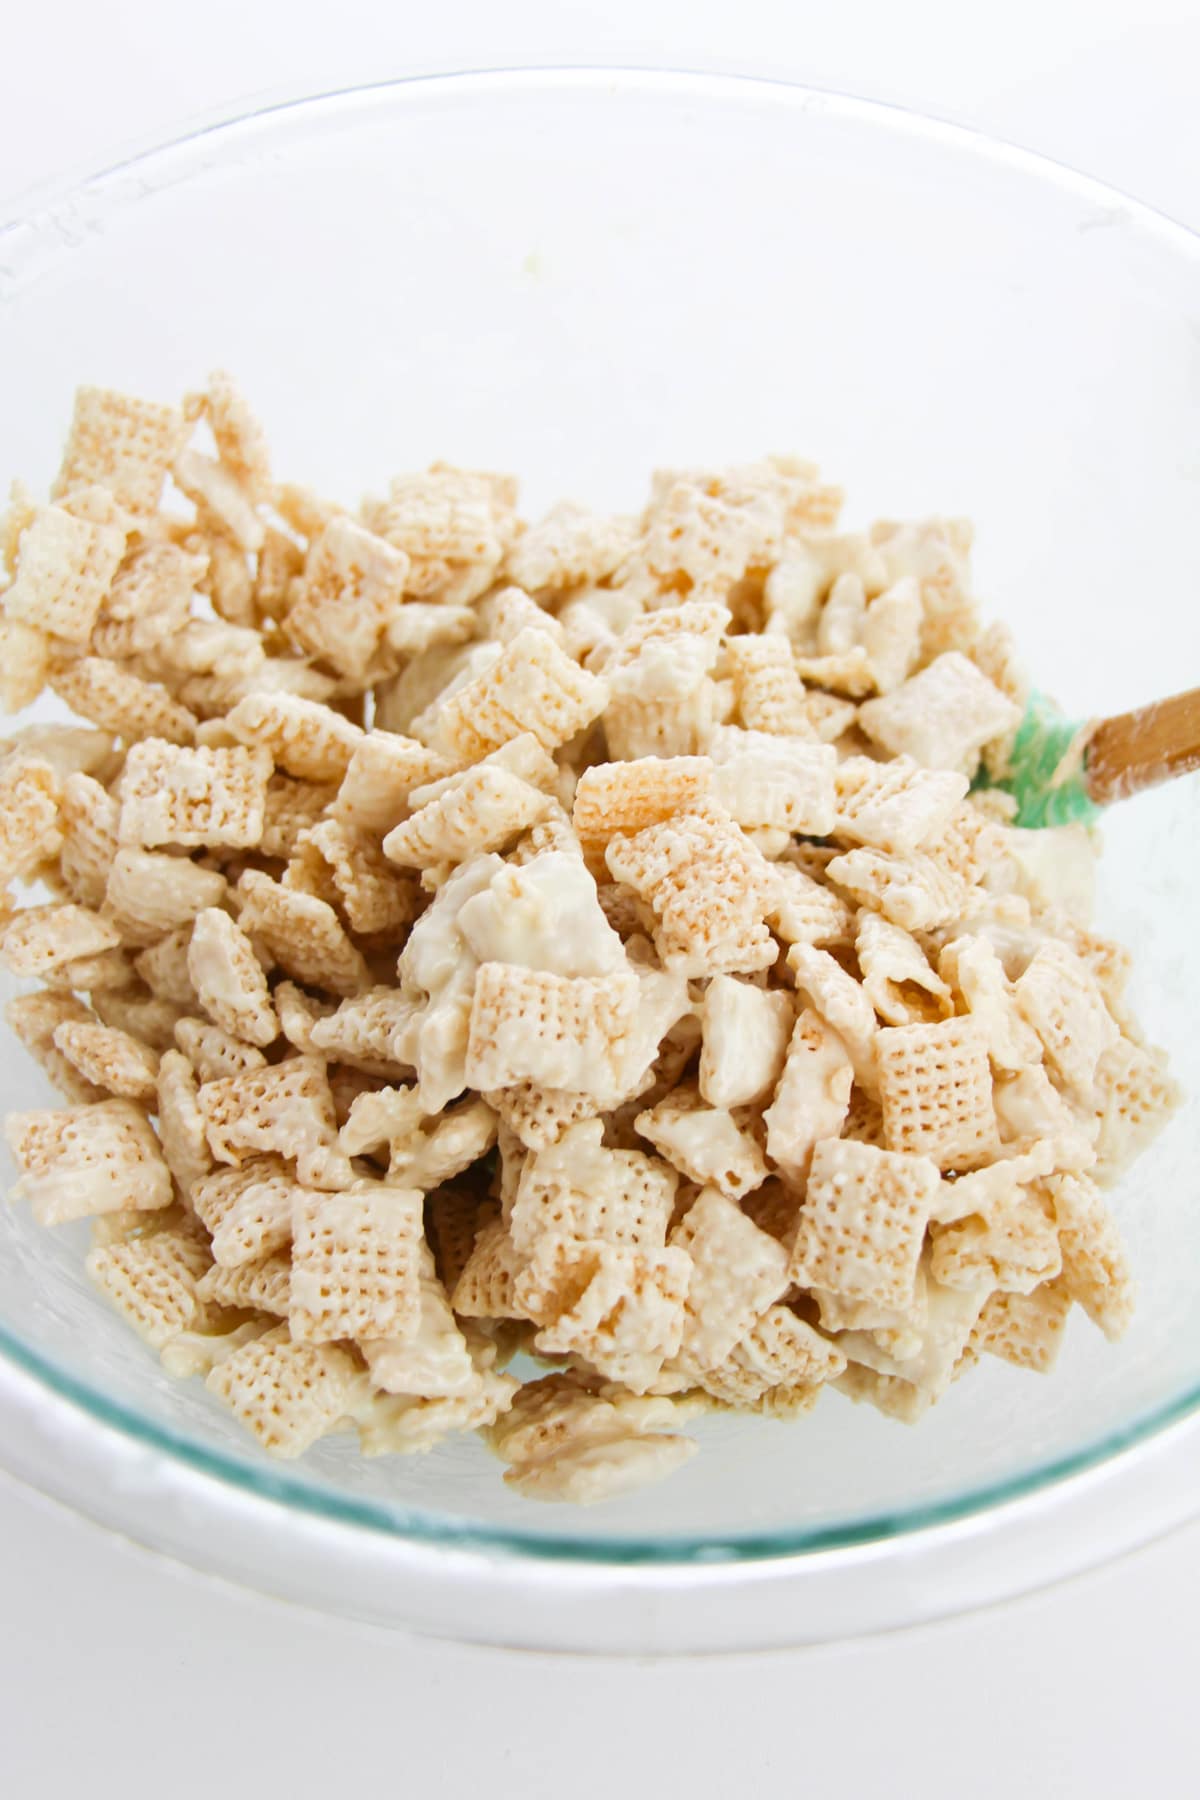 A bowl filled with chex cereal and melted white chocolate